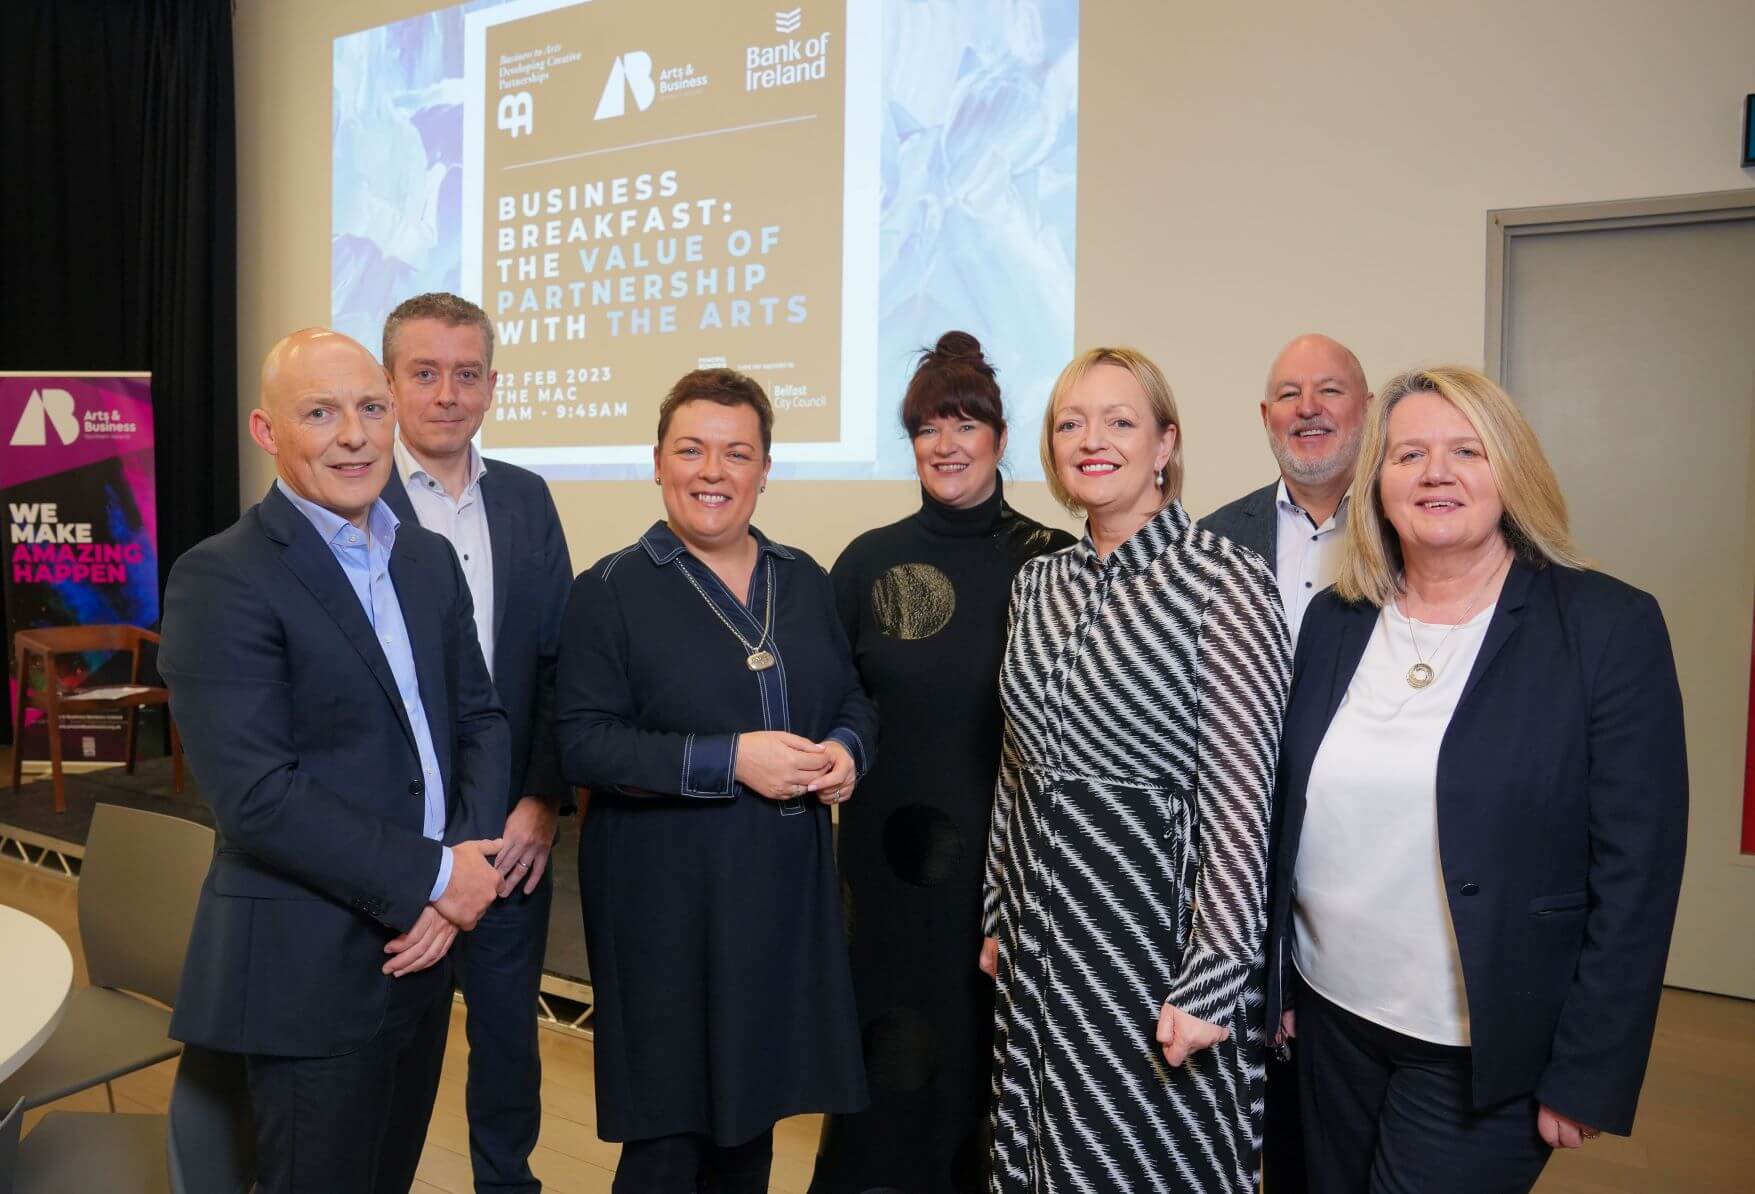 From left Johnny Hanna Partner-in-Charge KPMG, Damian McParland Chairman Arts & Business NI, Paula Murphy Group Director Brand & Sponsorship Bank of Ireland, Louise O’Reilly Chief Executive Business to Arts, Mary Nagele Chief Executive Arts & Business NI, John Harkin Founder & CEO, Alchemy Technology Services, Michele Devlin Director Belfast Film Festival